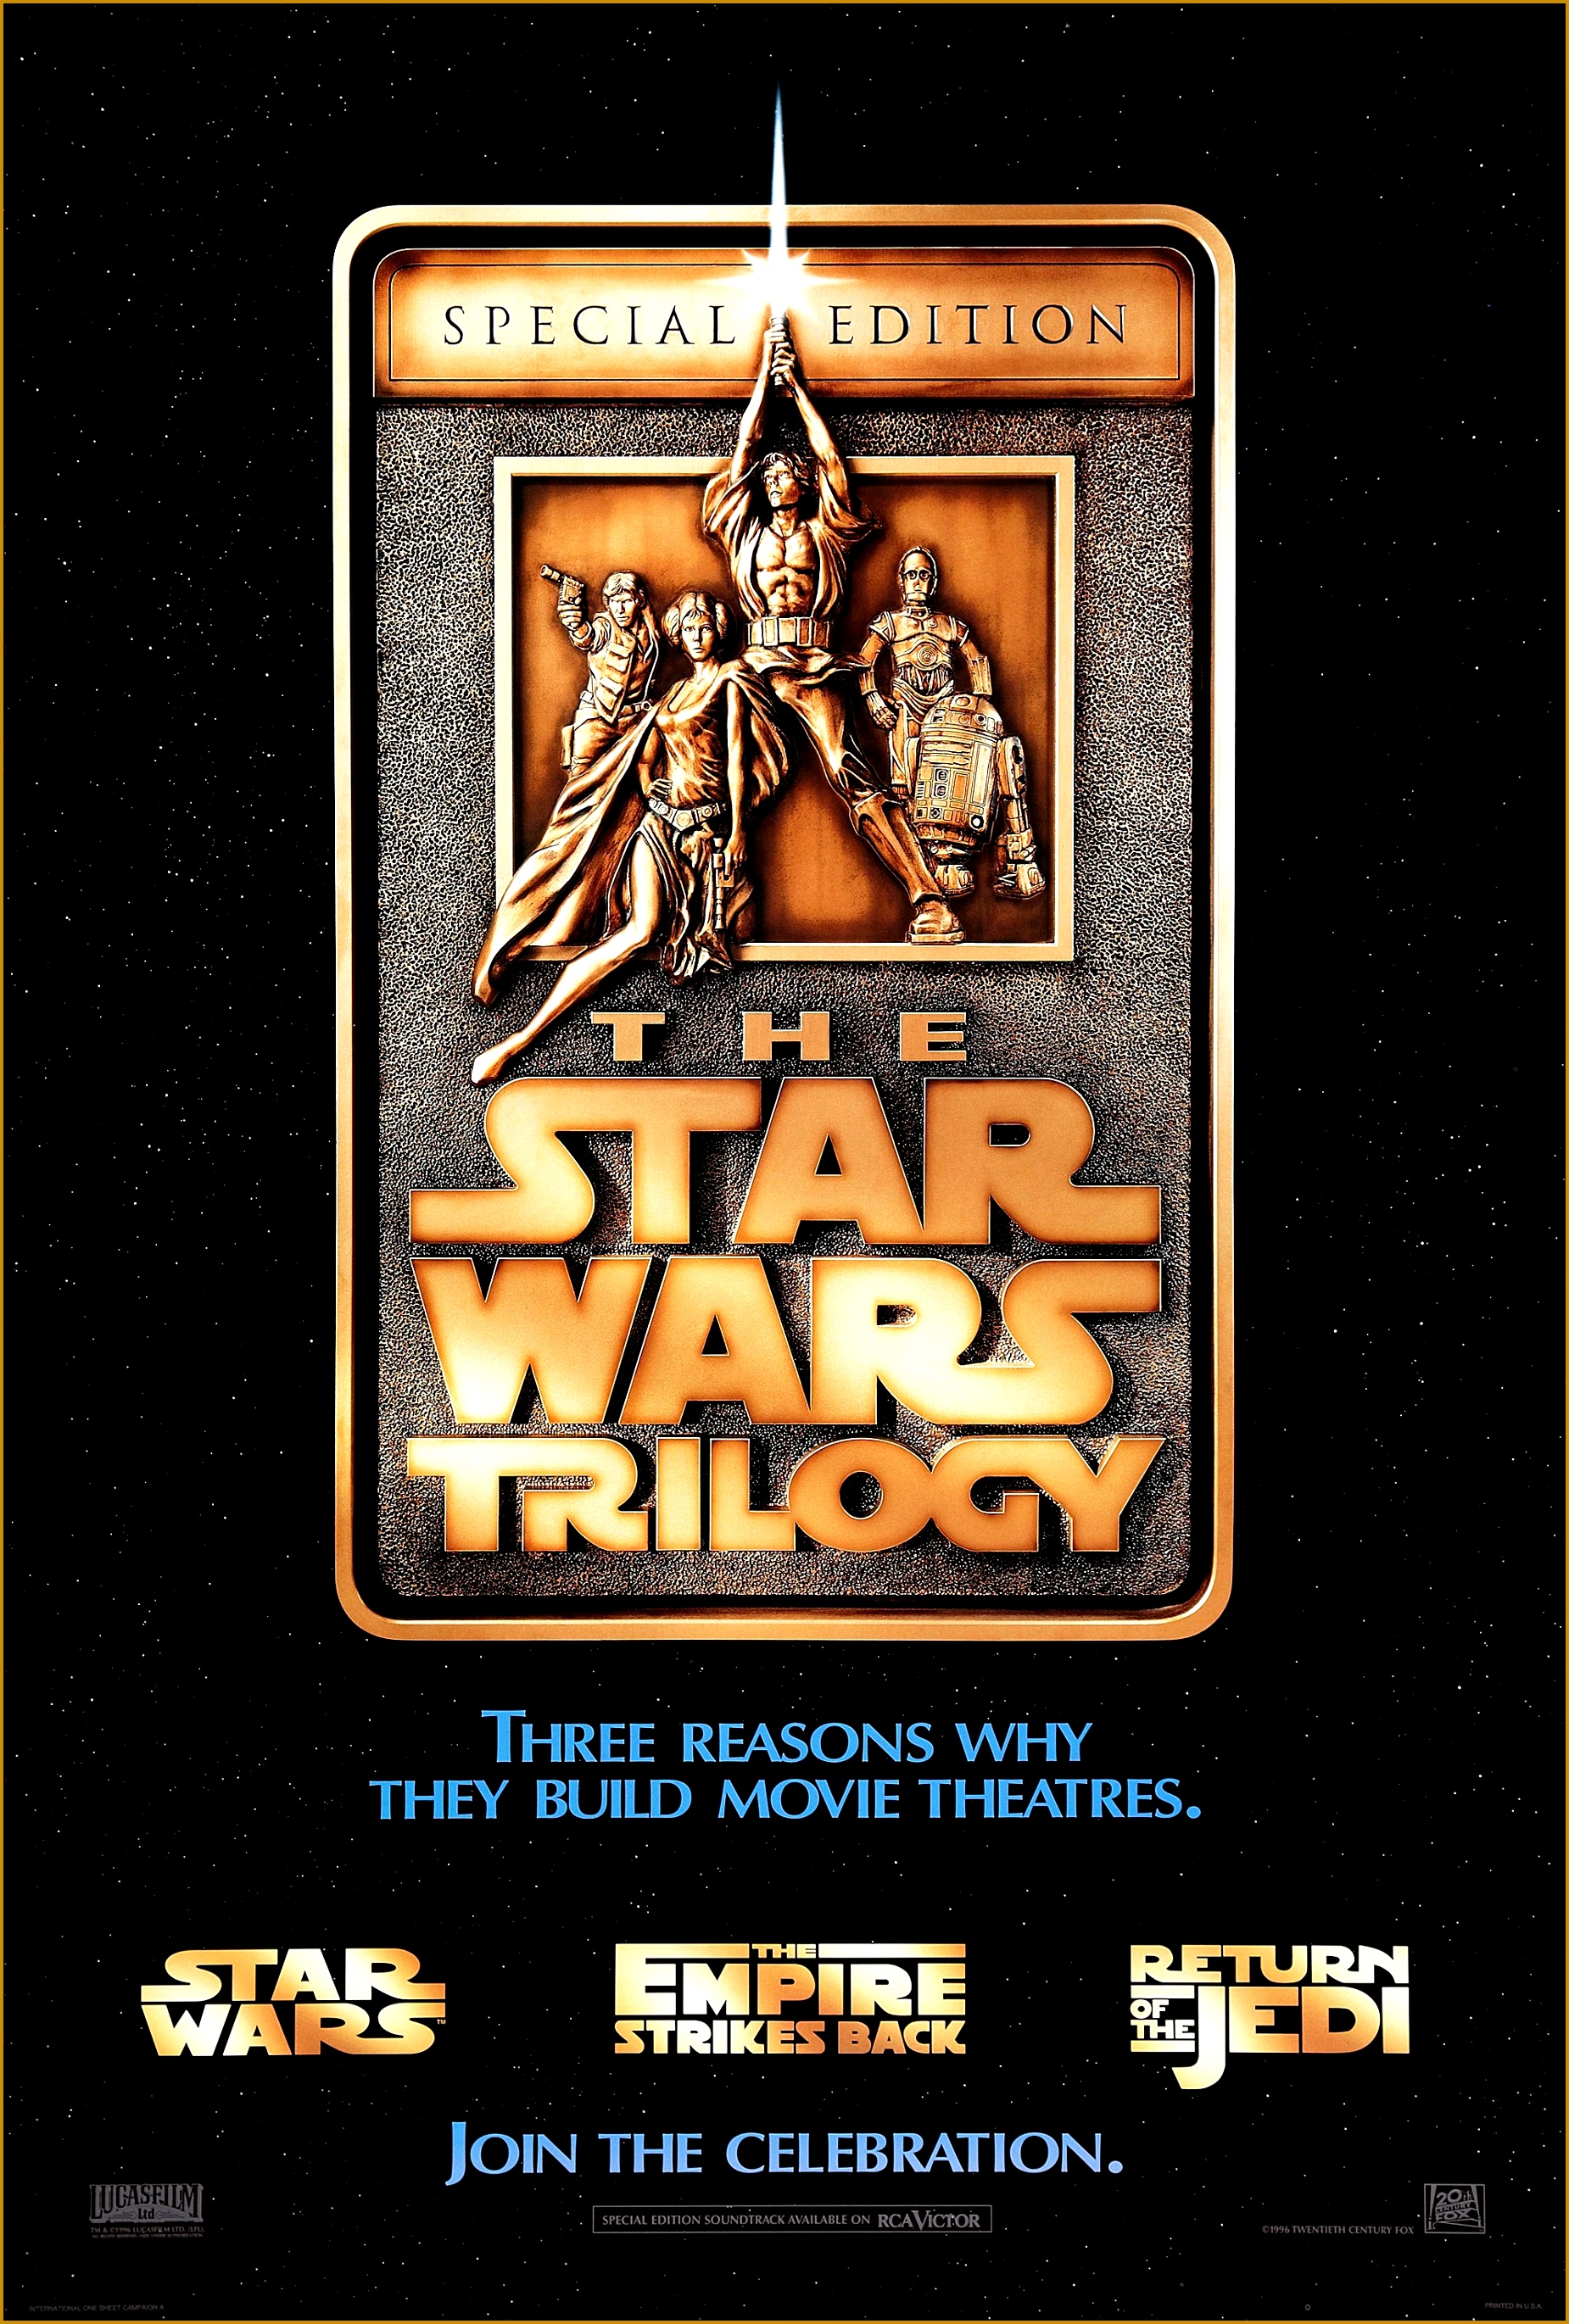 The Star Wars Trilogy Special Edition Wookieepedia 27411850